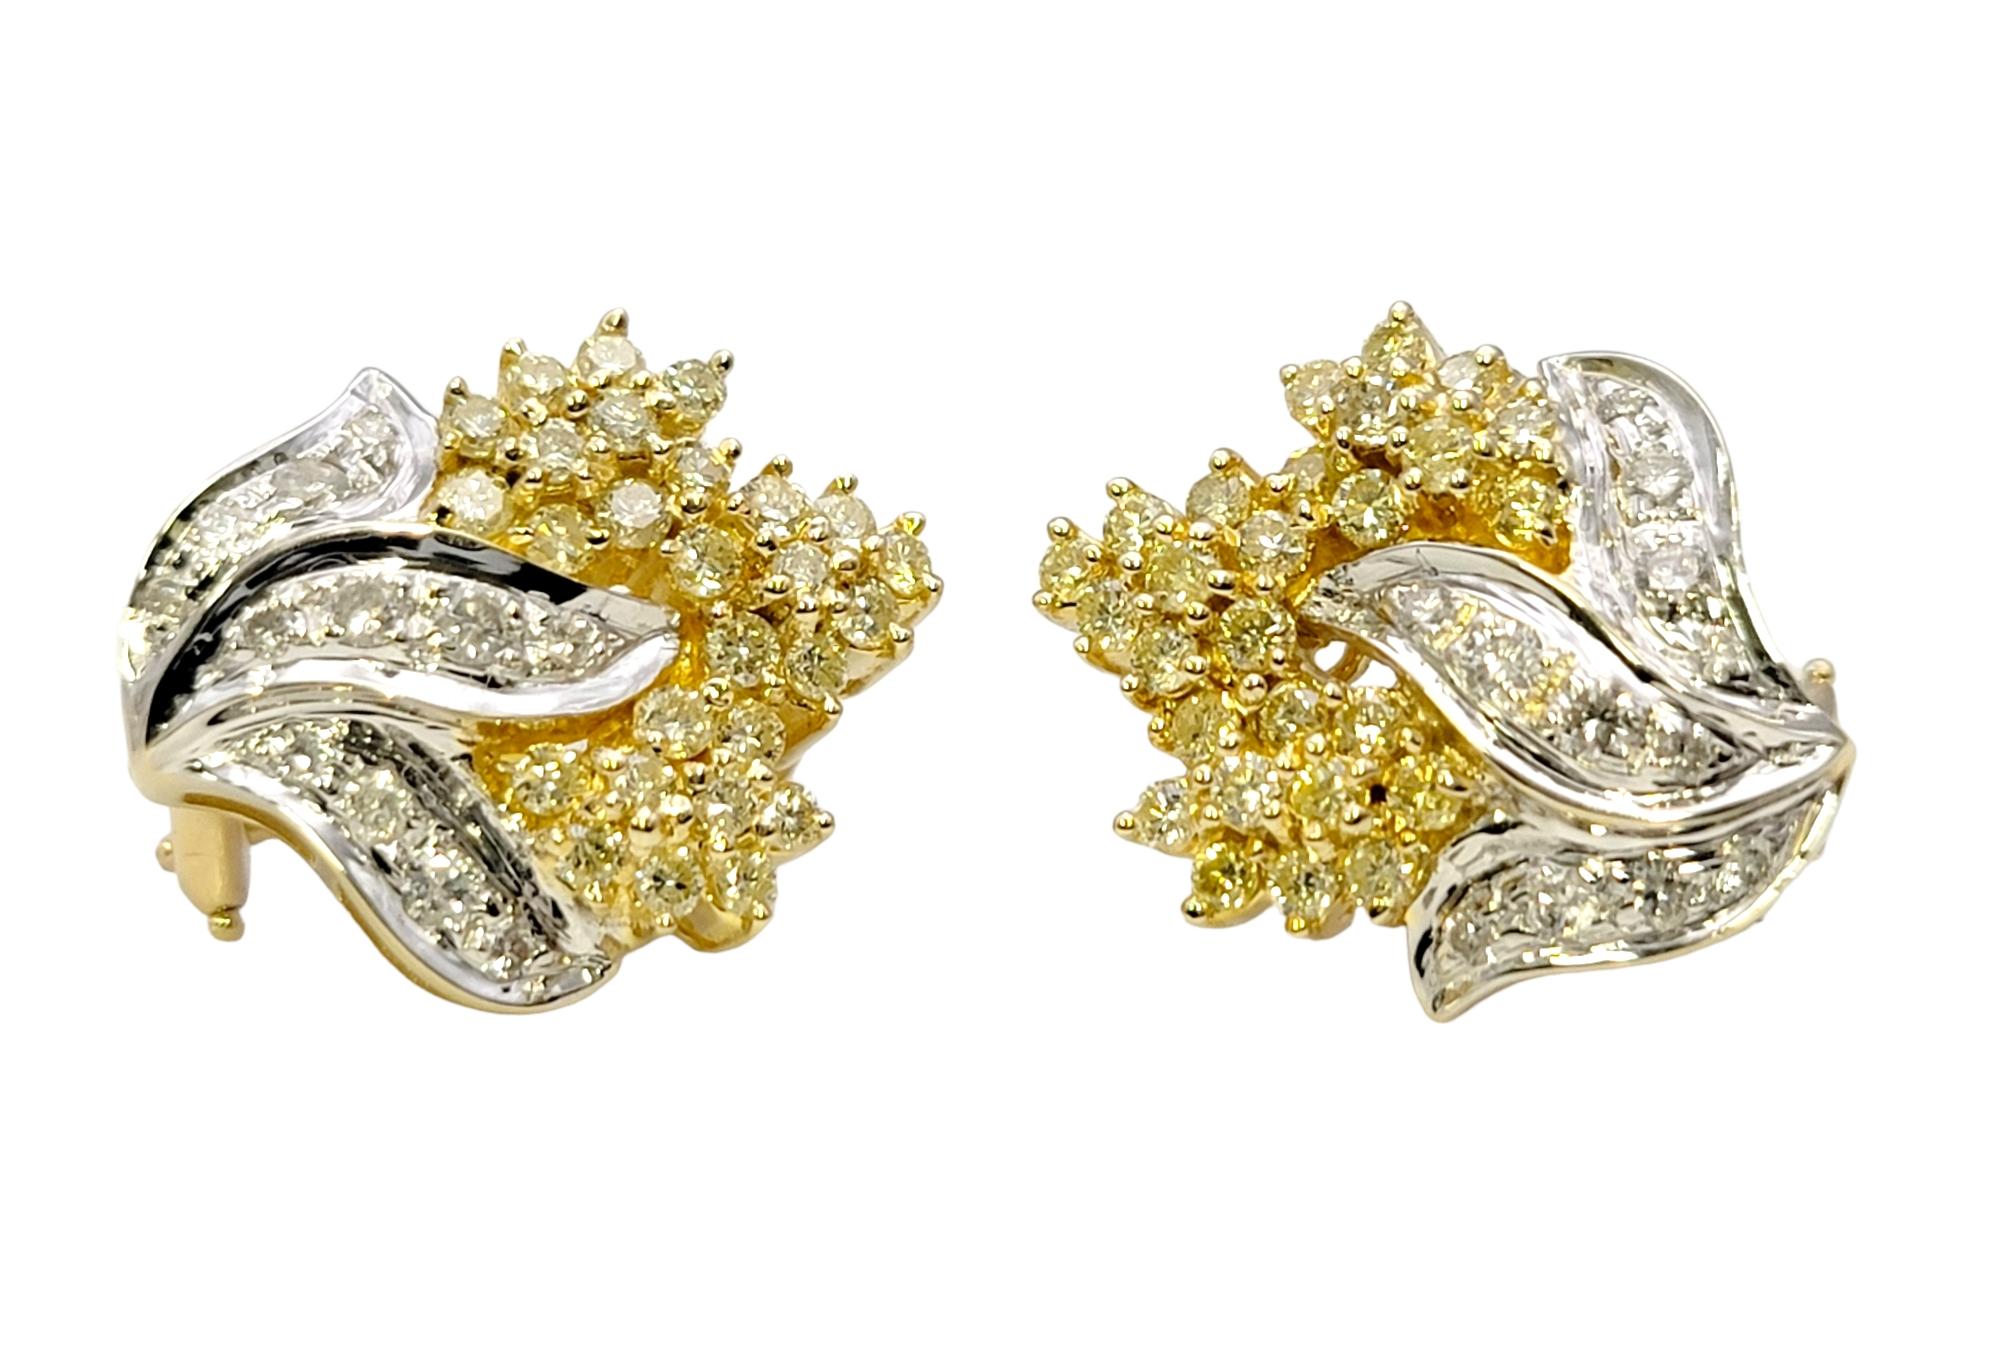 These super sparkly diamond cluster earrings absolutely glow. The elegant two toned design pops beautifully on the lobe, giving a chic and glamorous look. 

These beautiful earrings each feature shimmering clusters of white and fancy light yellow